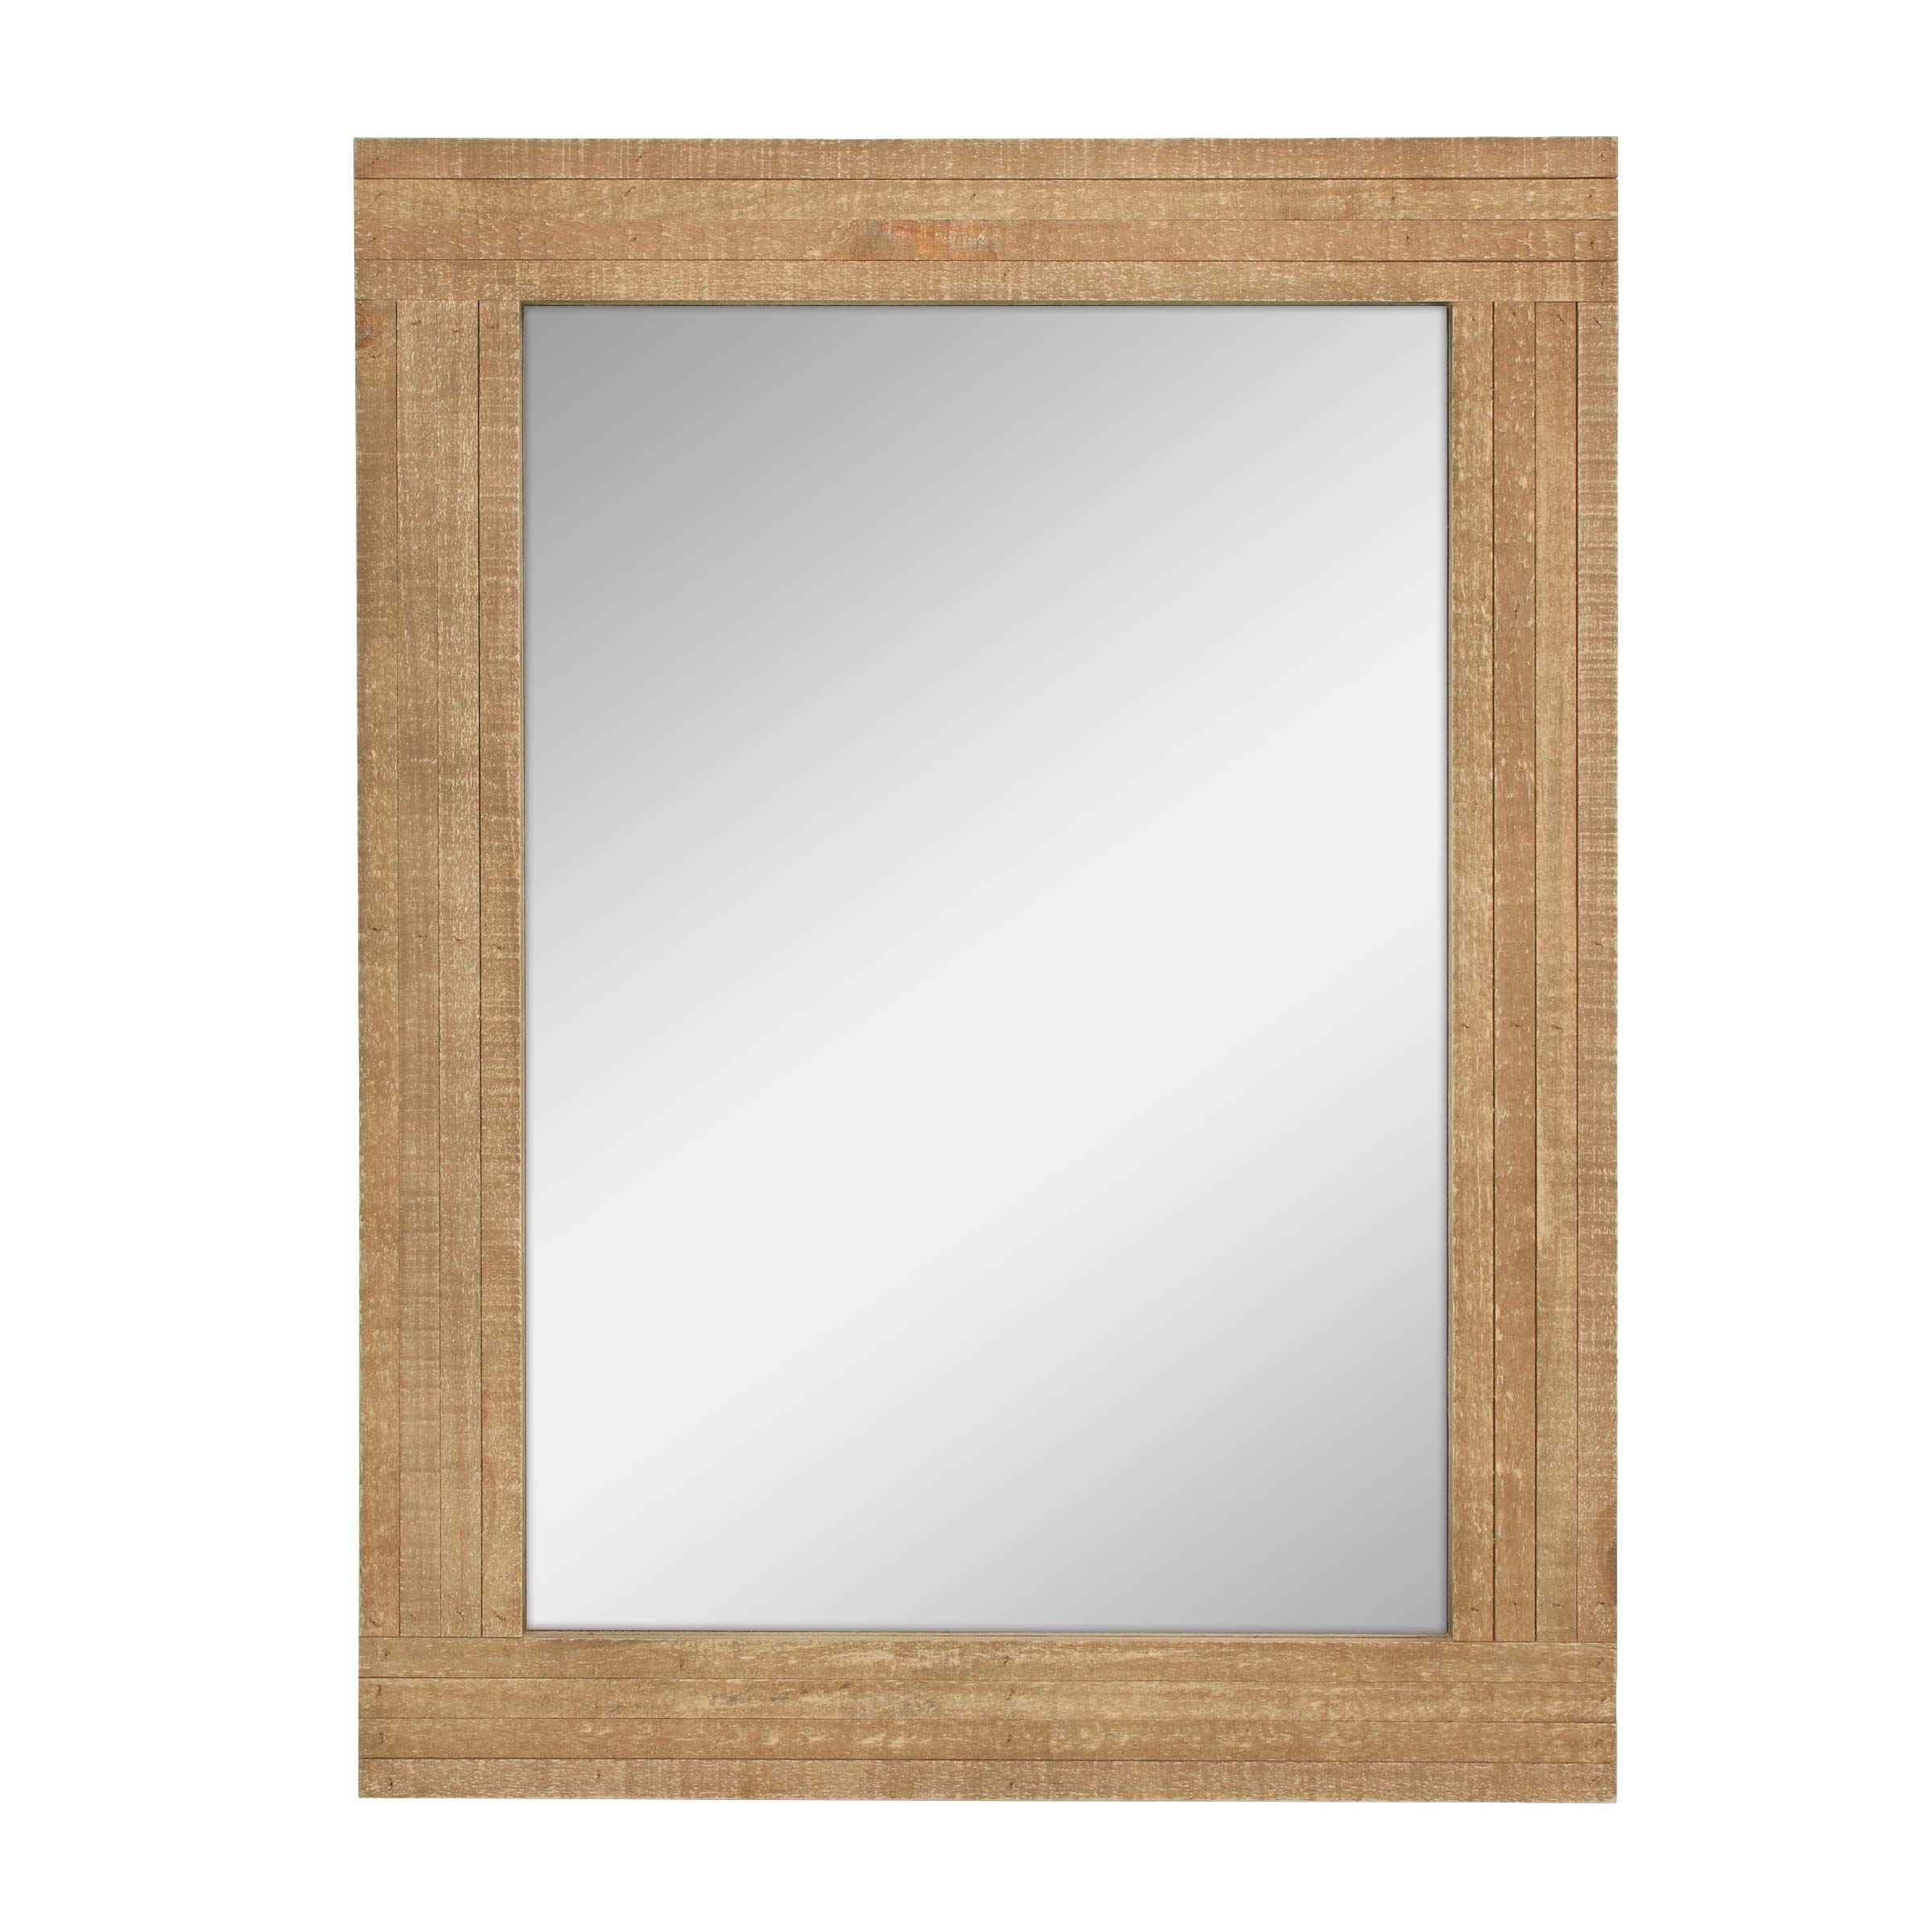 Rectangle Natural Wood Frame Hanging Wall Mirror Rustic Farmhouse Decor